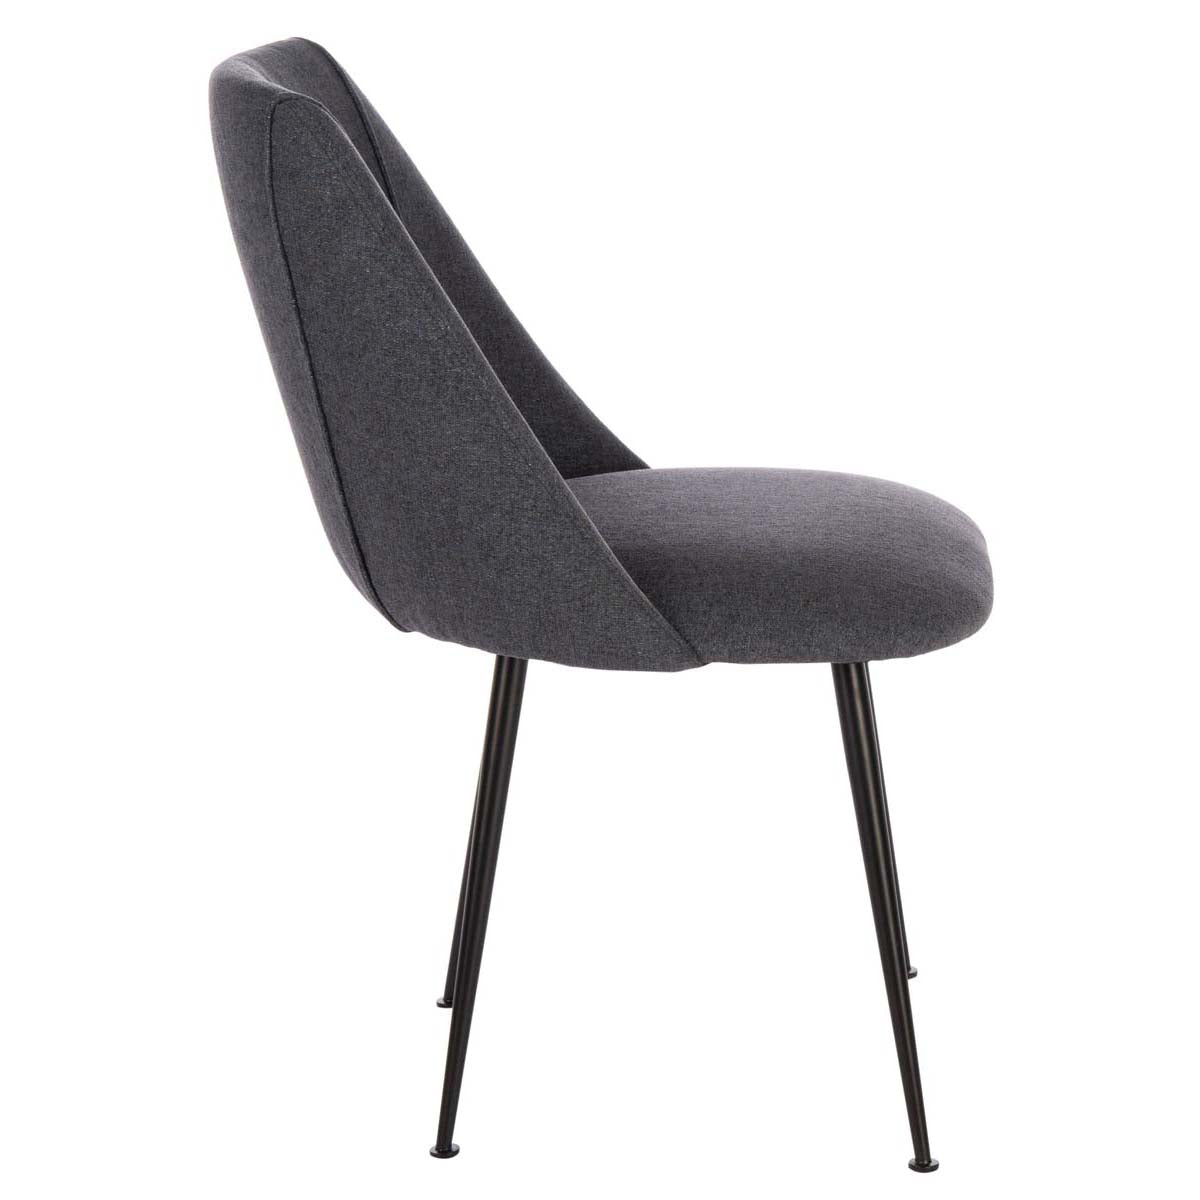 Safavieh Couture Foster Poly Blend Dining Chair - Navy  / Black